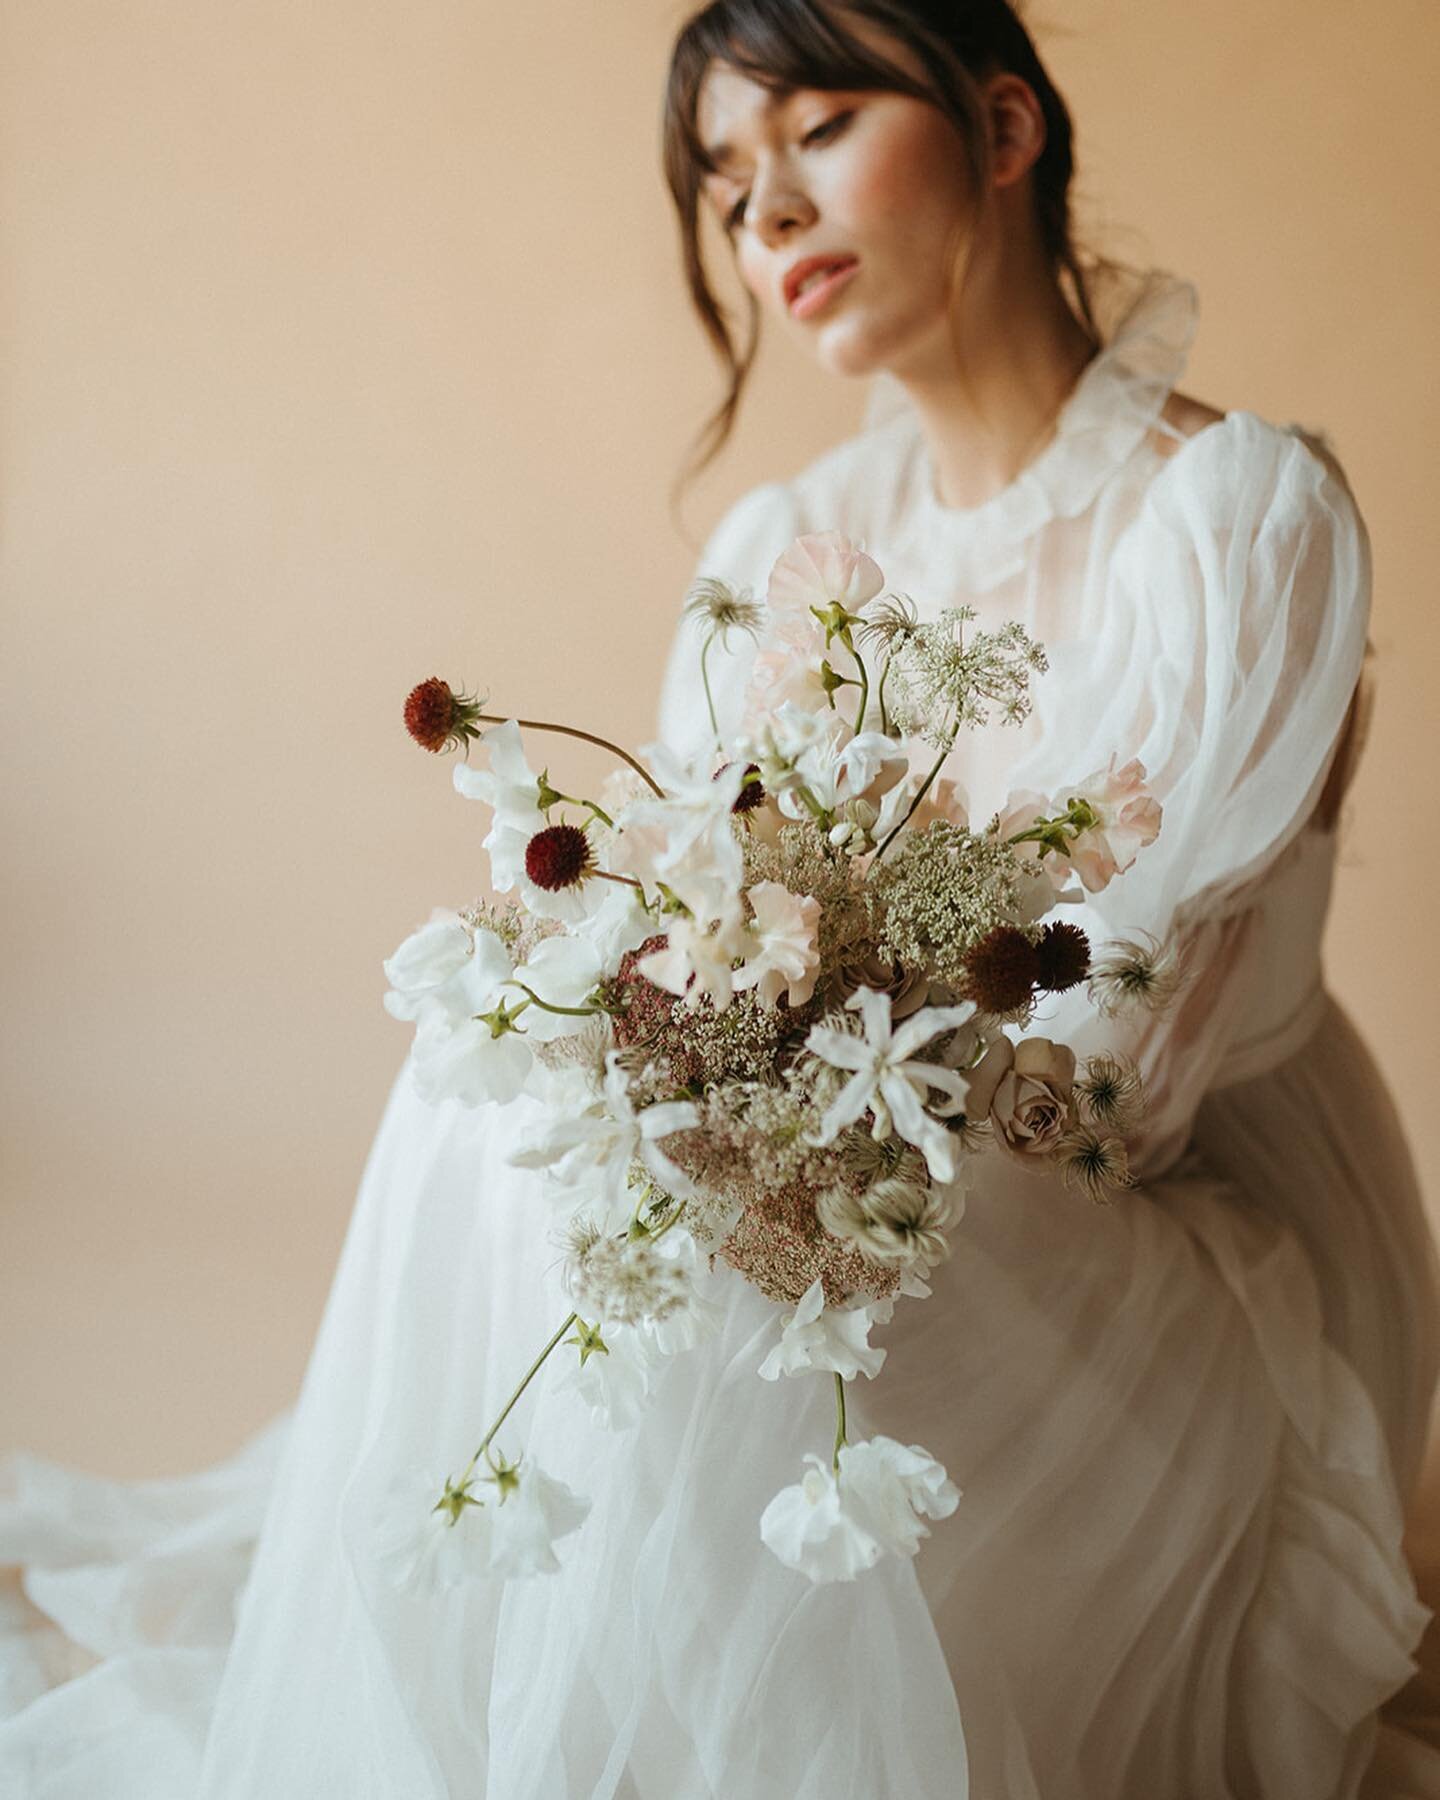 Sweet peas, nerine lilies &amp; the most ethereal @odylynetheceremony puff sleeves and flouncy collar are the perfect match. This dress was such an inspiration to design for!!

Your wedding attire &amp; detailing informs the flowers we choose for you